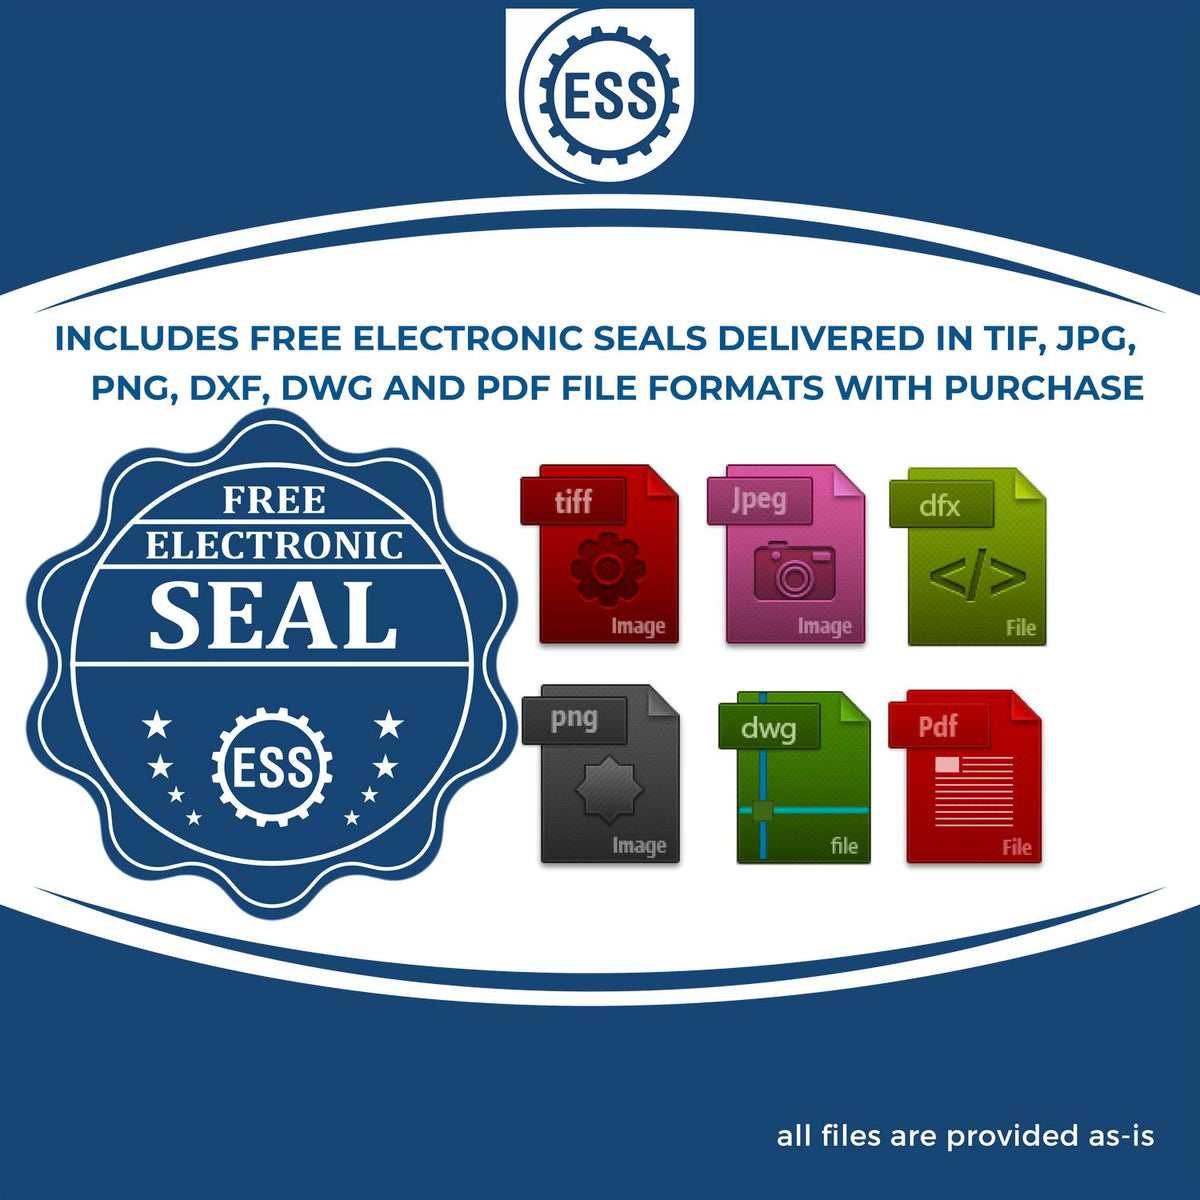 An infographic for the free electronic seal for the Gift Massachusetts Landscape Architect Seal illustrating the different file type icons such as DXF, DWG, TIF, JPG and PNG.